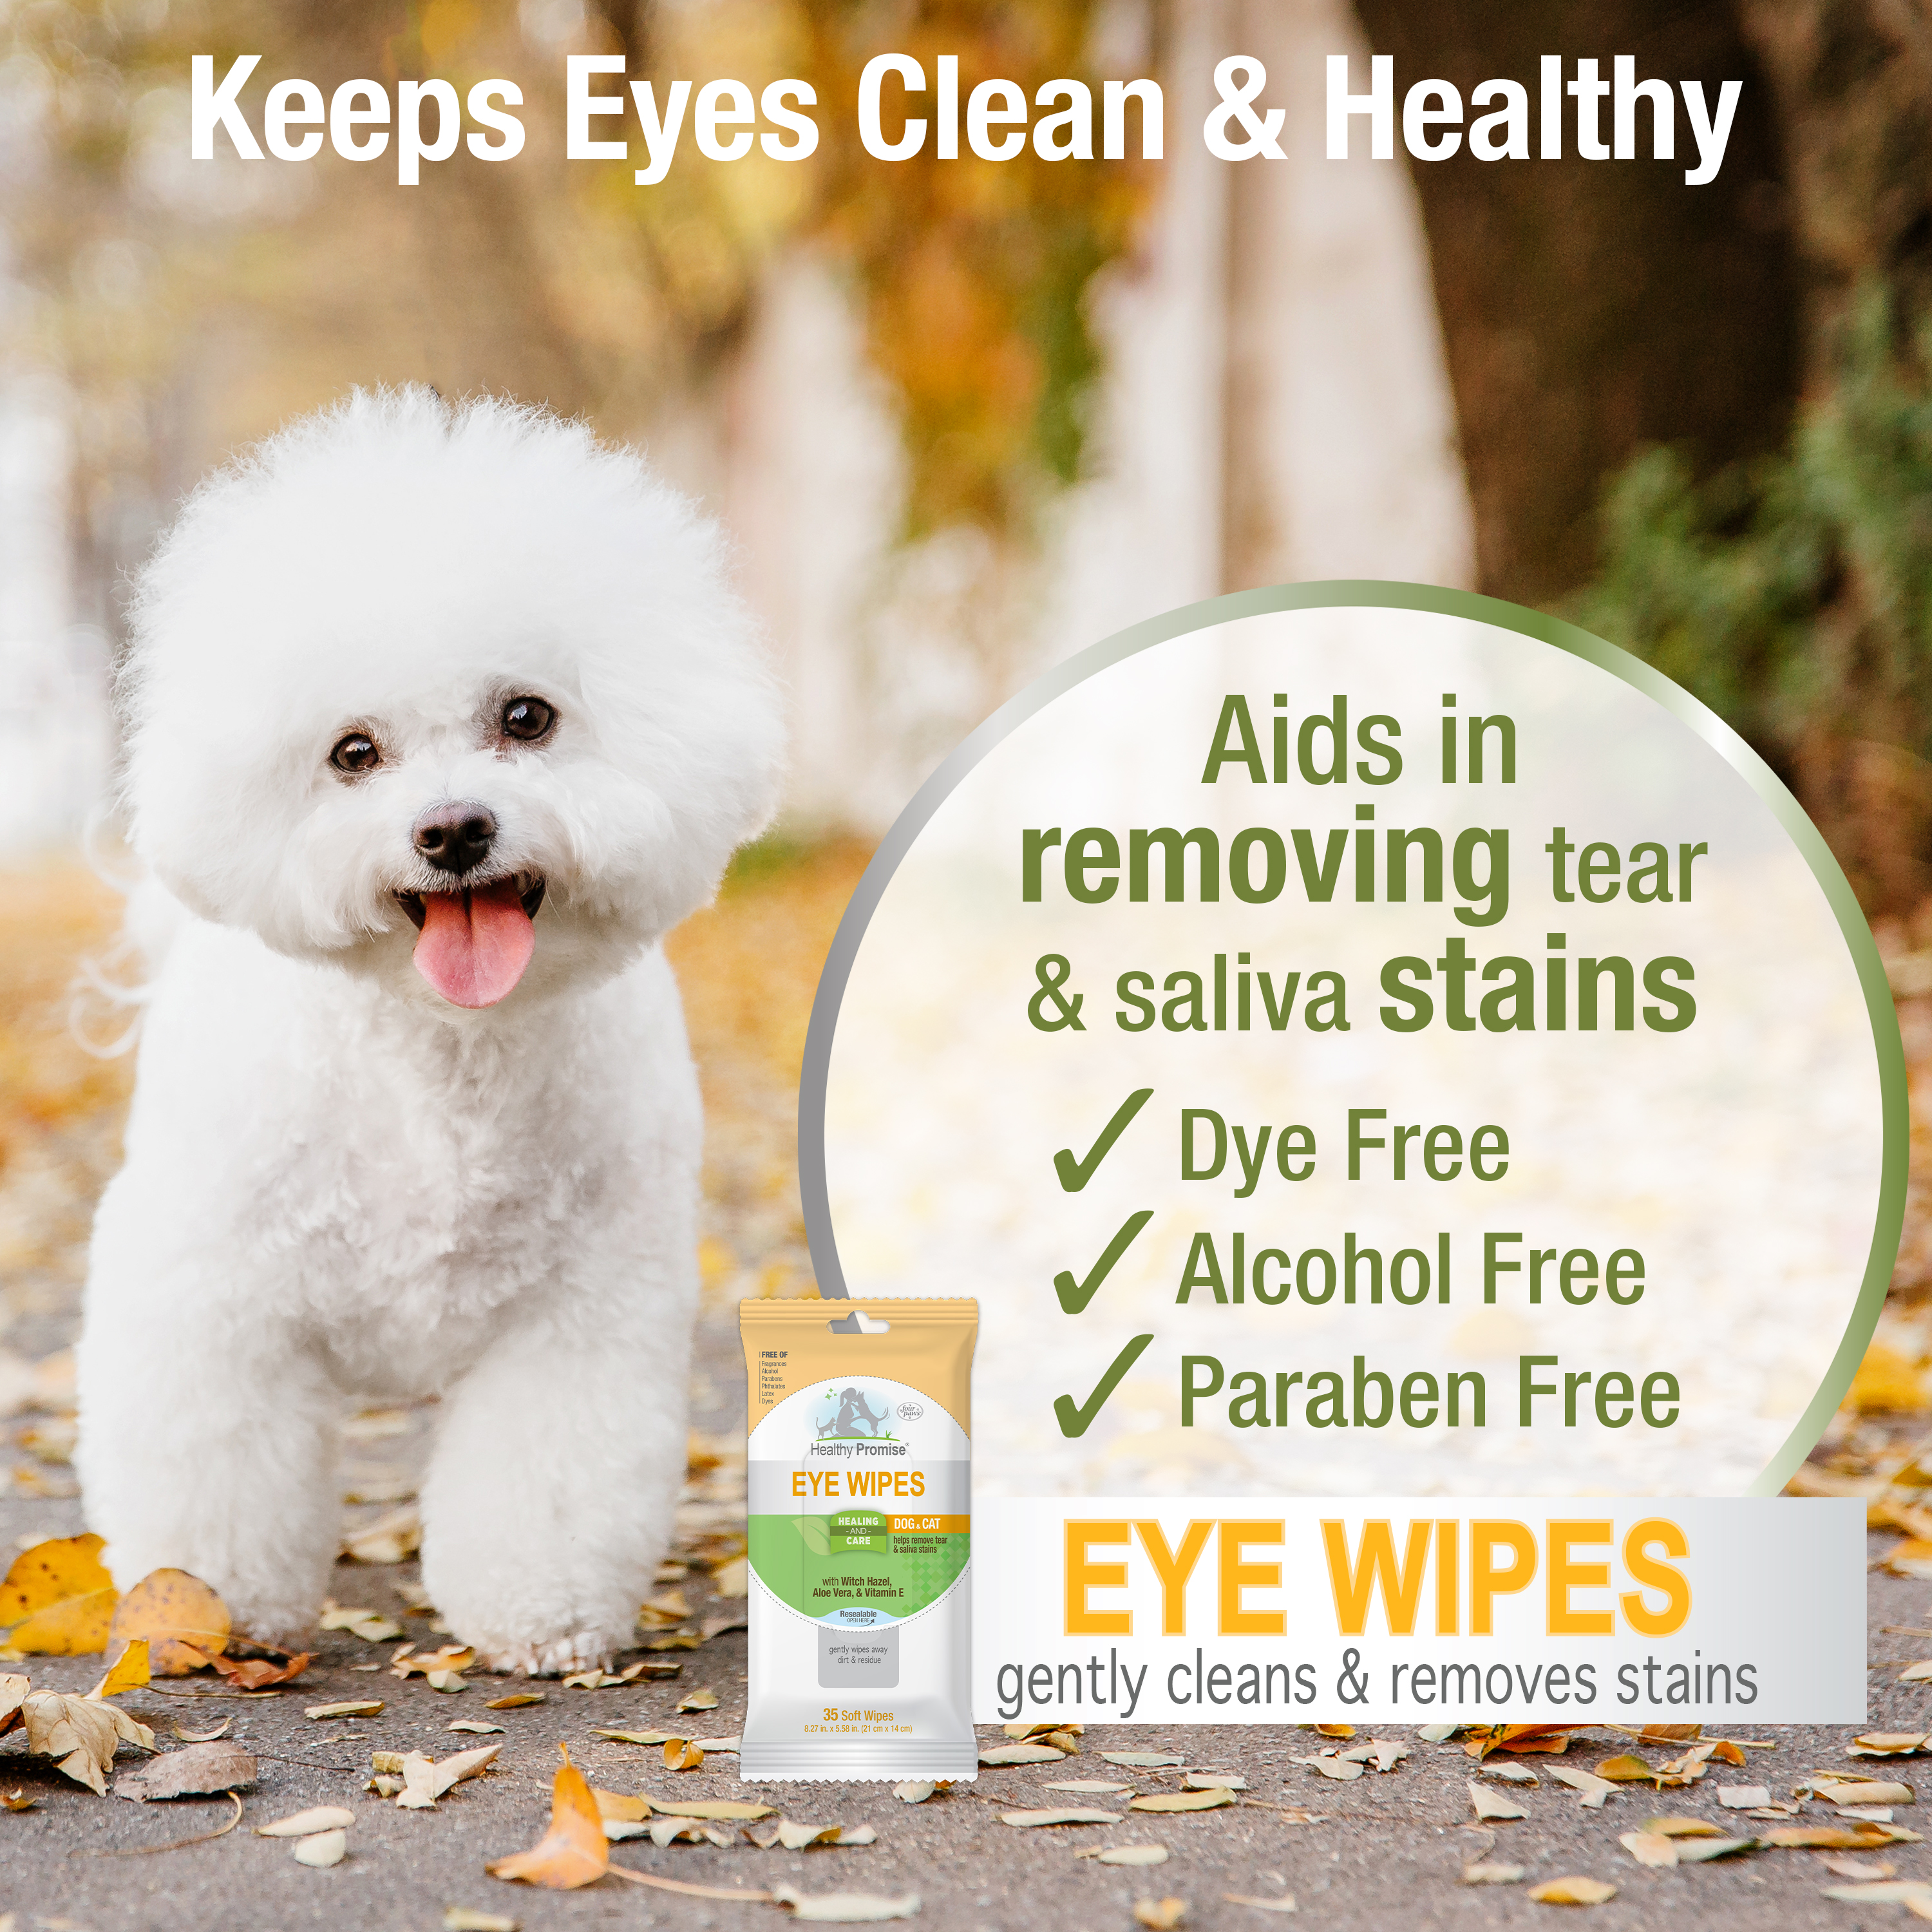 Four Paws Healthy Promise Eye Wipes Features Benefits